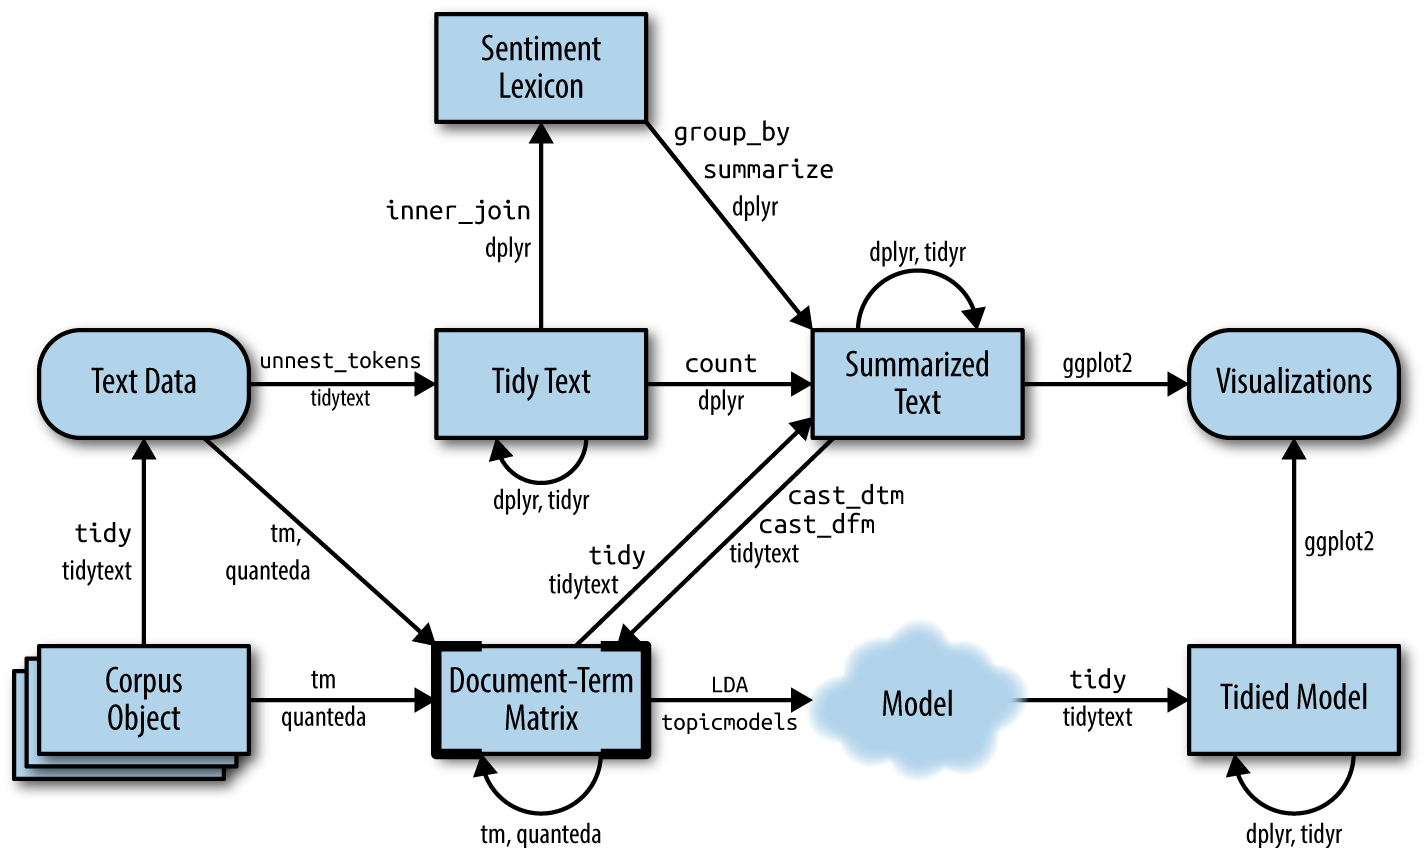 A flowchart of a text analysis that incorporates topic modeling. The topicmodels package takes a Document-Term Matrix as input and produces a model that can be tided by tidytext, such that it can be manipulated and visualized with dplyr and ggplot2.